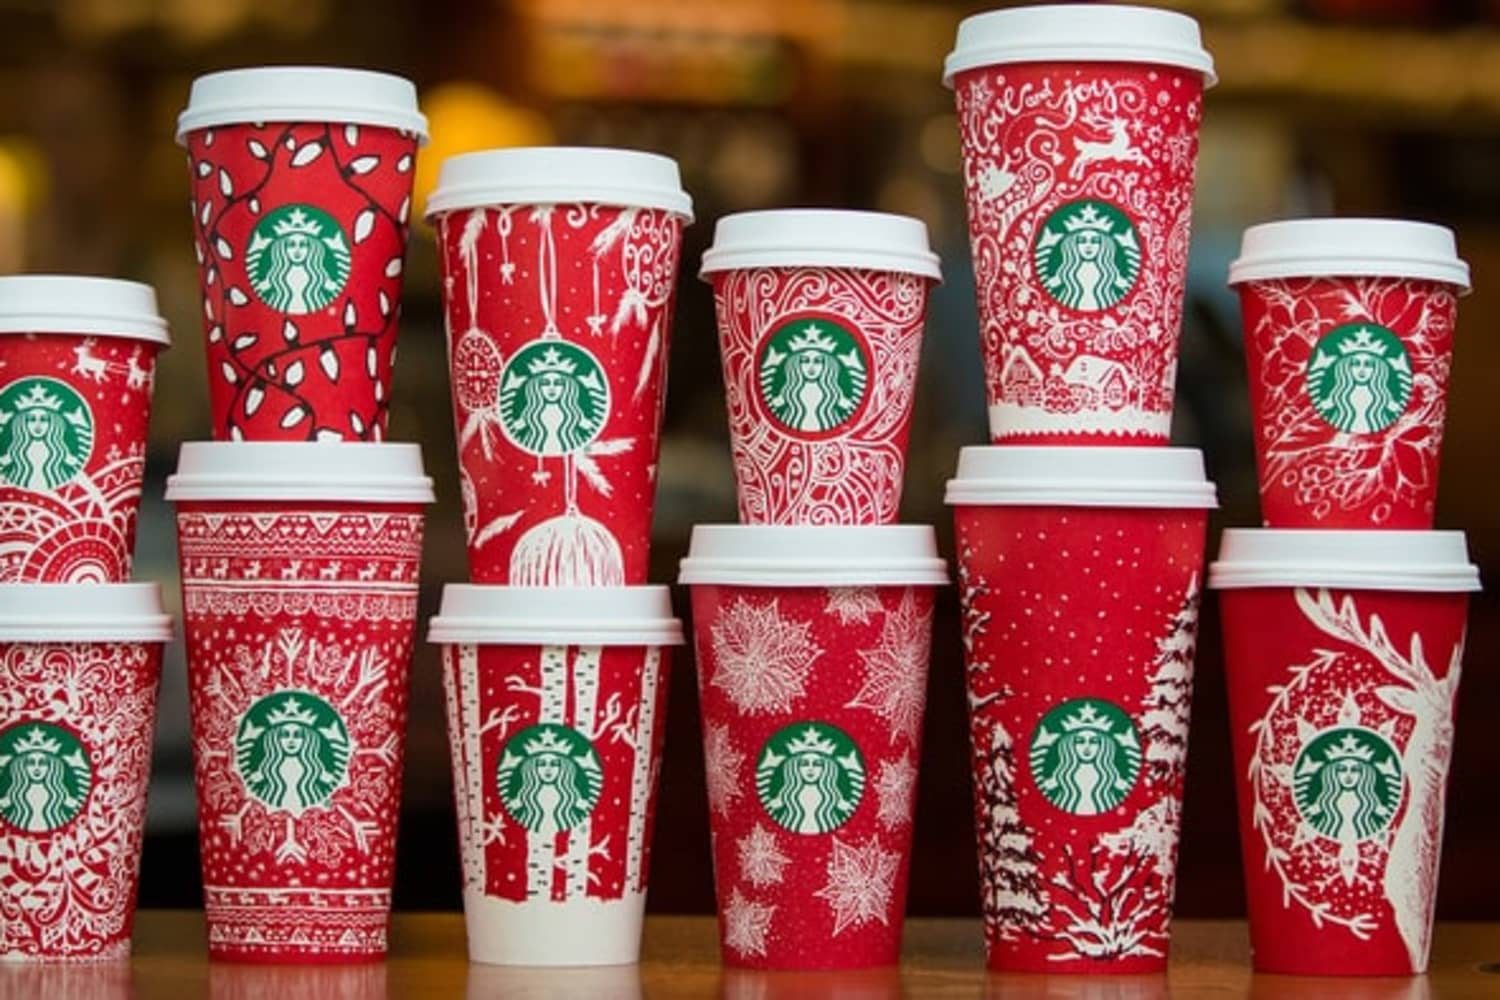 Starbucks Unveils Its 2018 Holiday Cup Designs